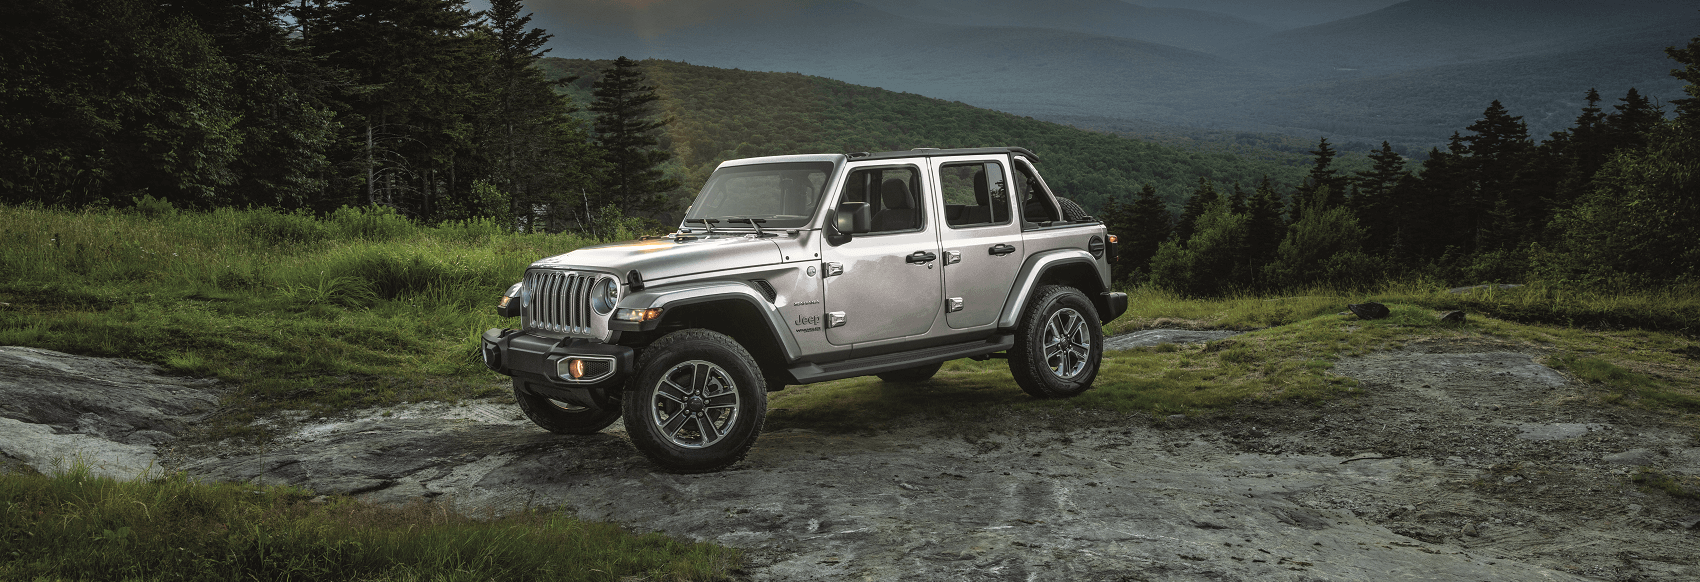 silver jeep gladiator parked on mountain dirt